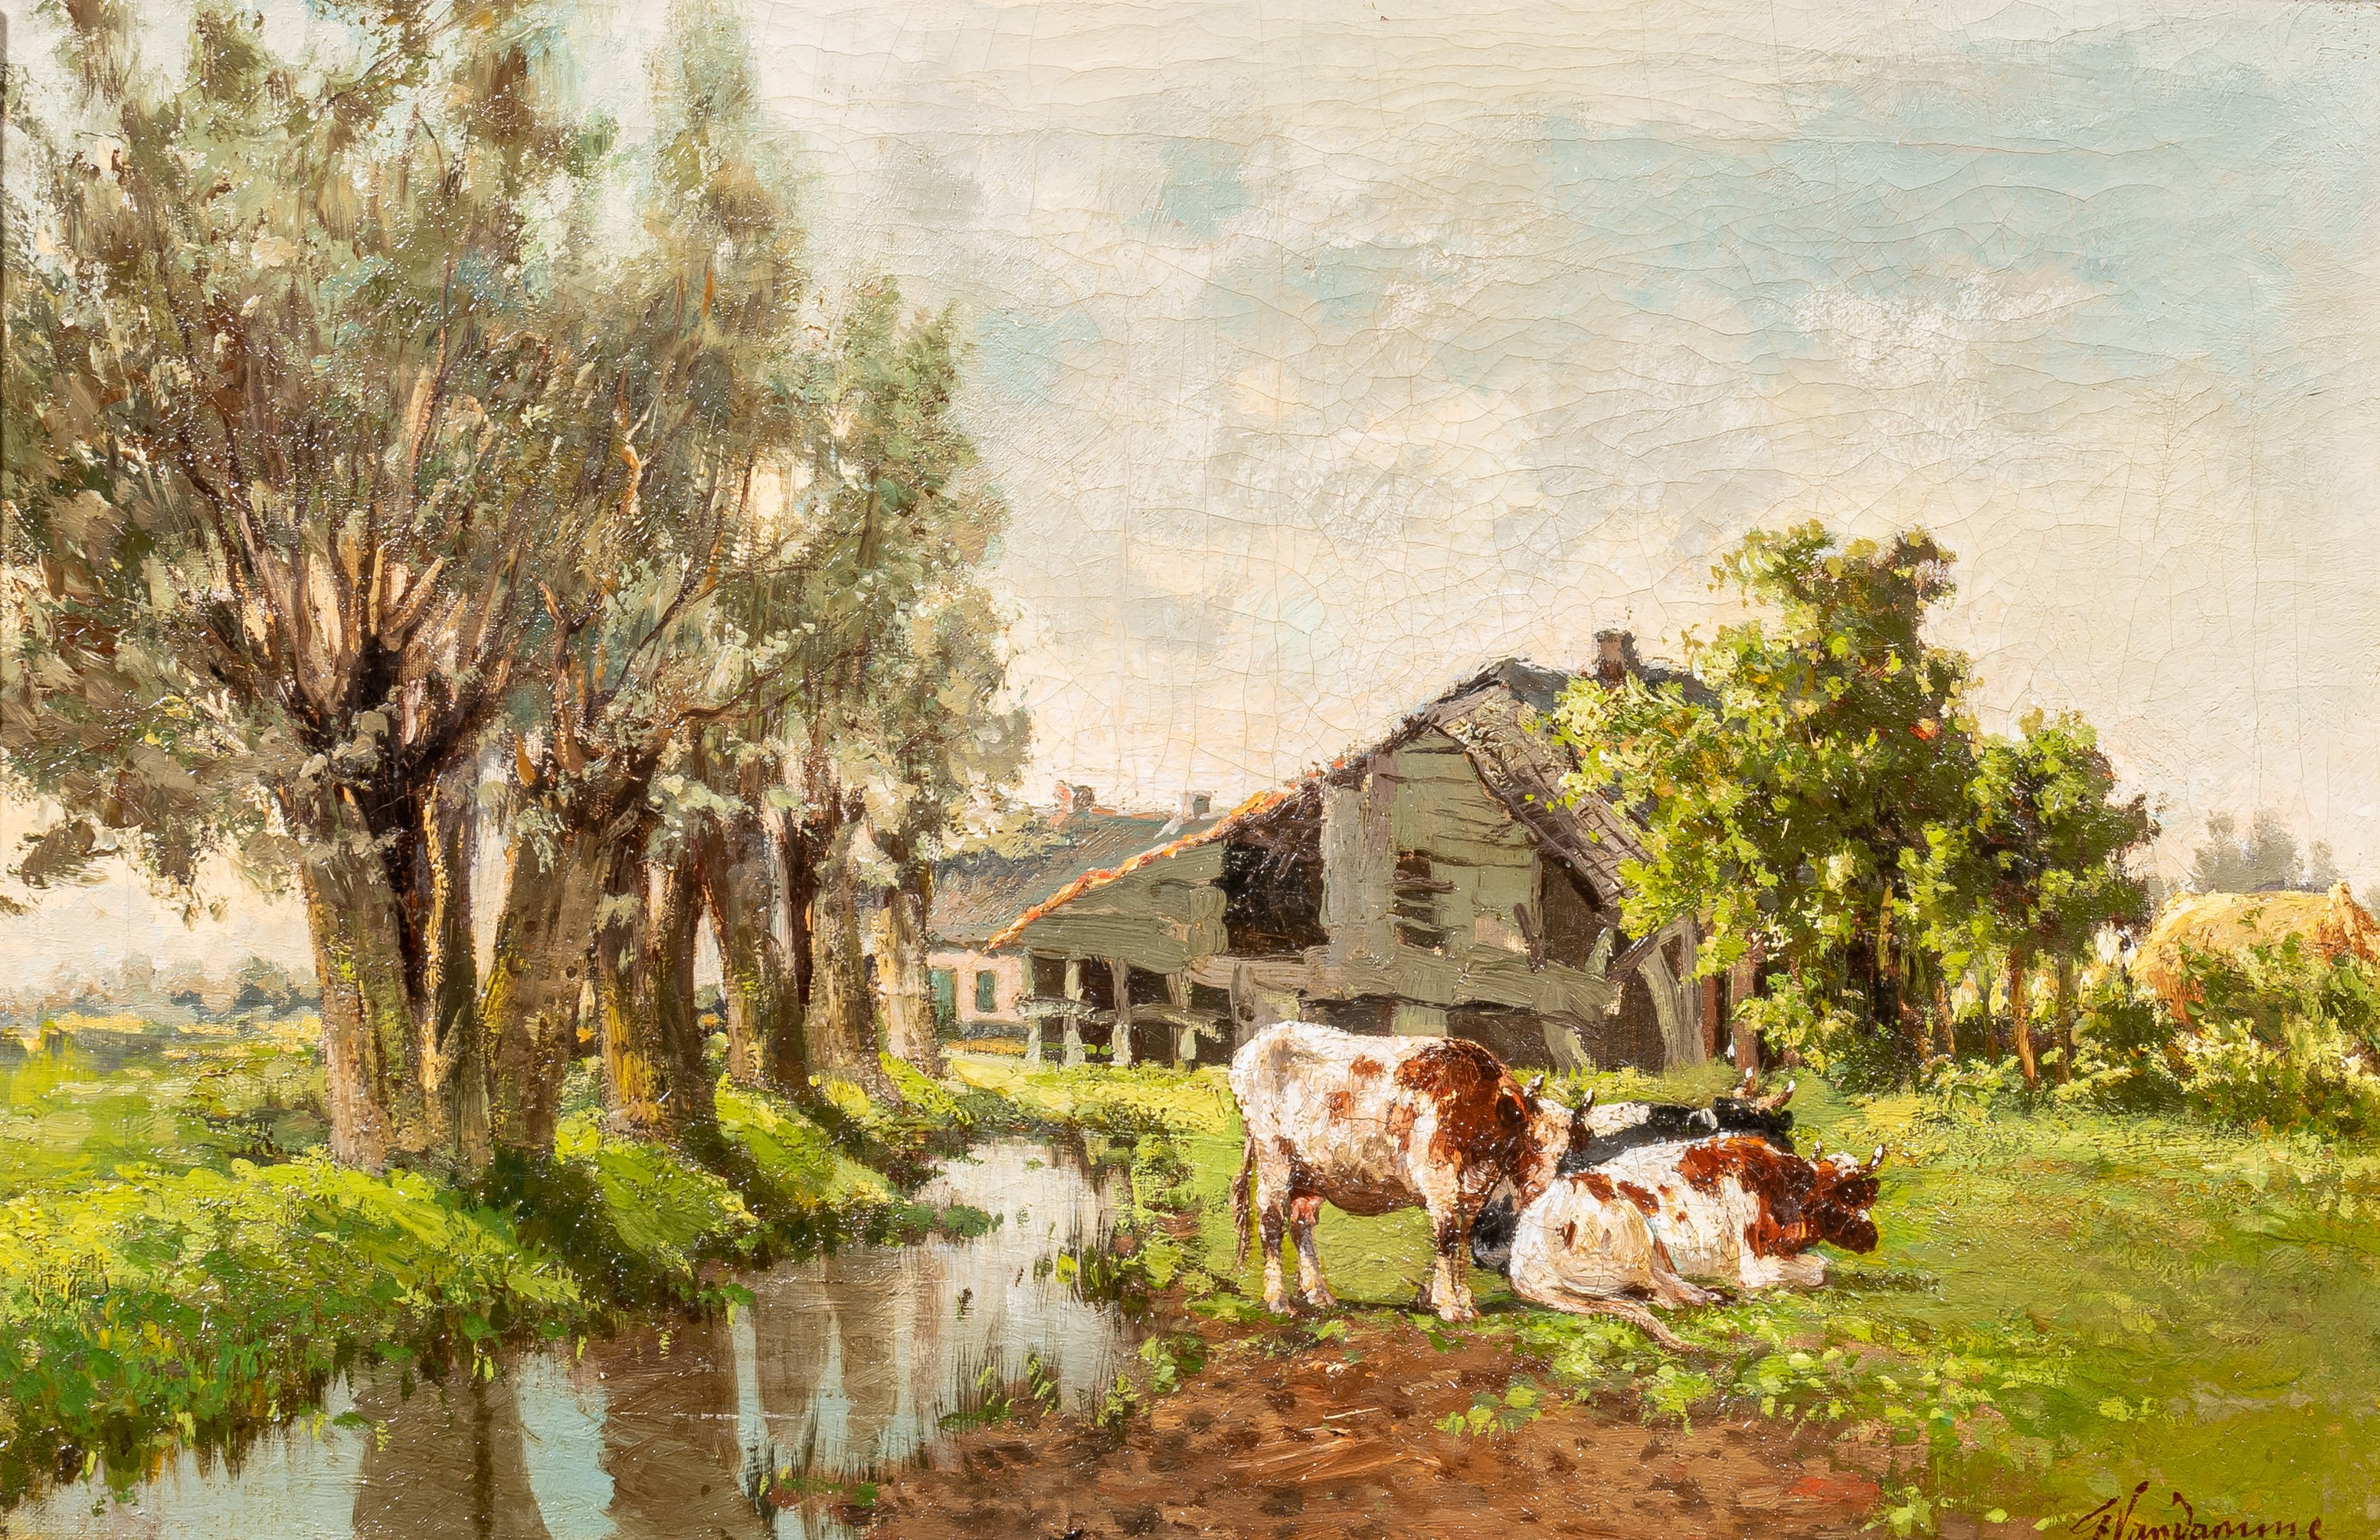 Frans Vandamme (1858-1925), cows in the meadow near a ditch, oil on canvas 36 x 54 cm. (14.1 x 21.2